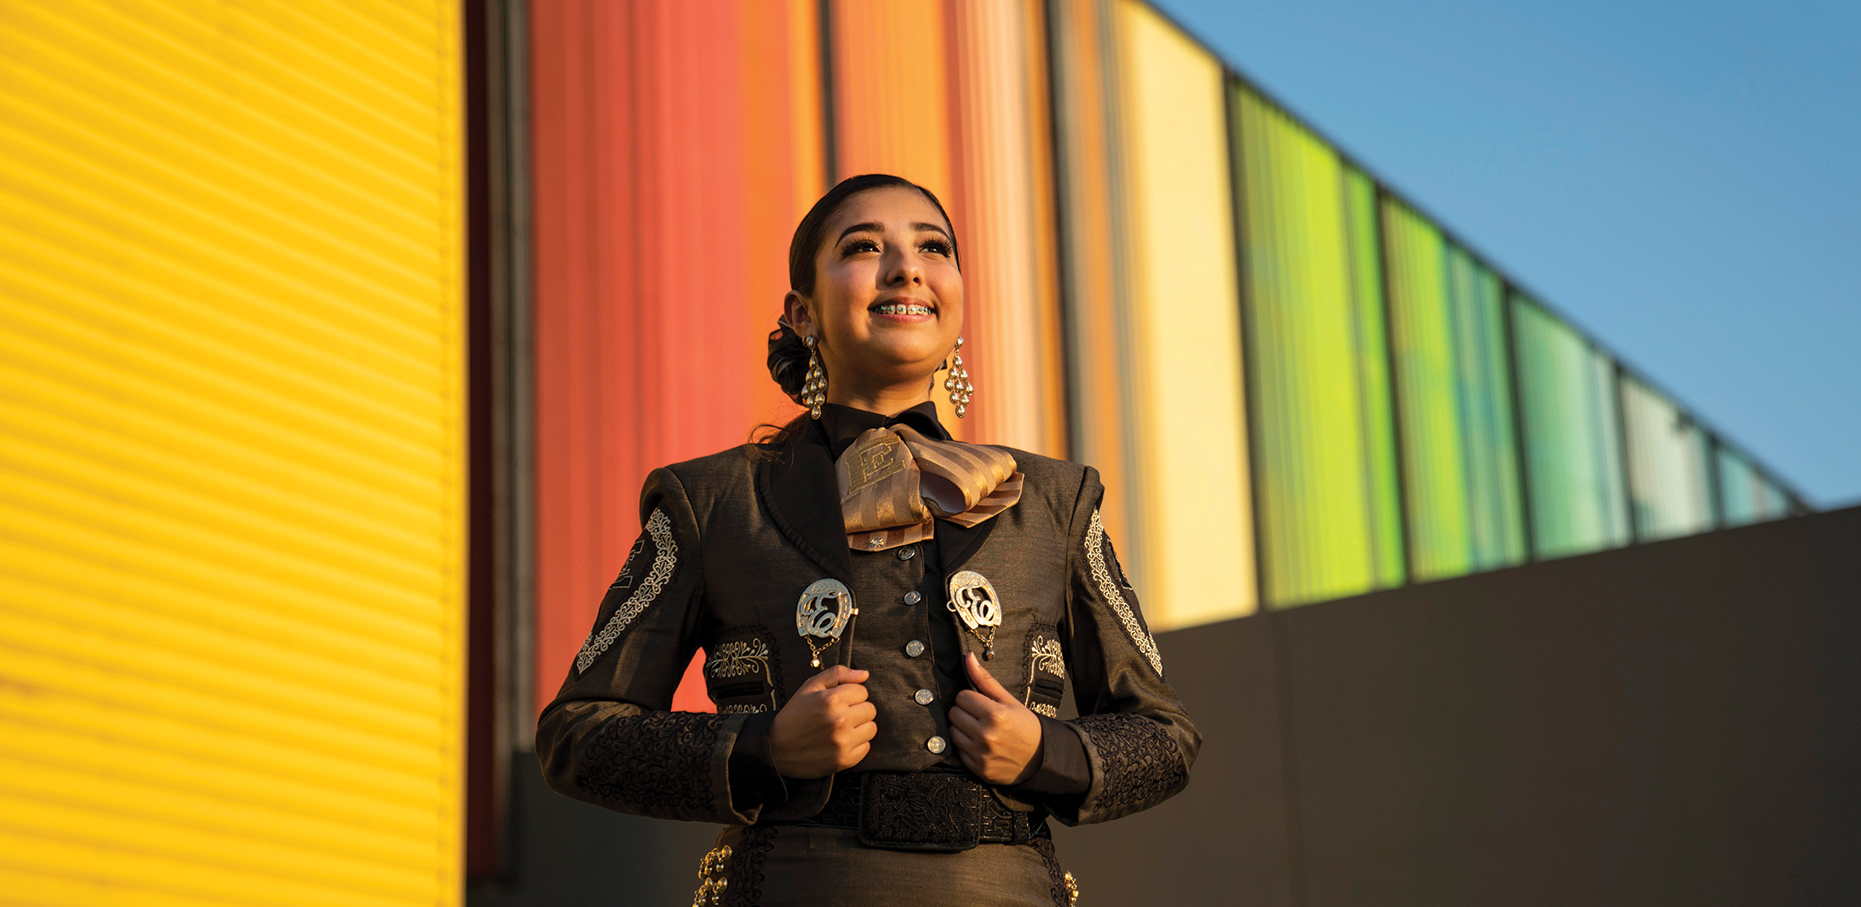 Marissa Navarro is one of 17 students from Edcouch-Elsa High School in the Rio Grande Valley who performed in a statewide mariachi festival this spring.